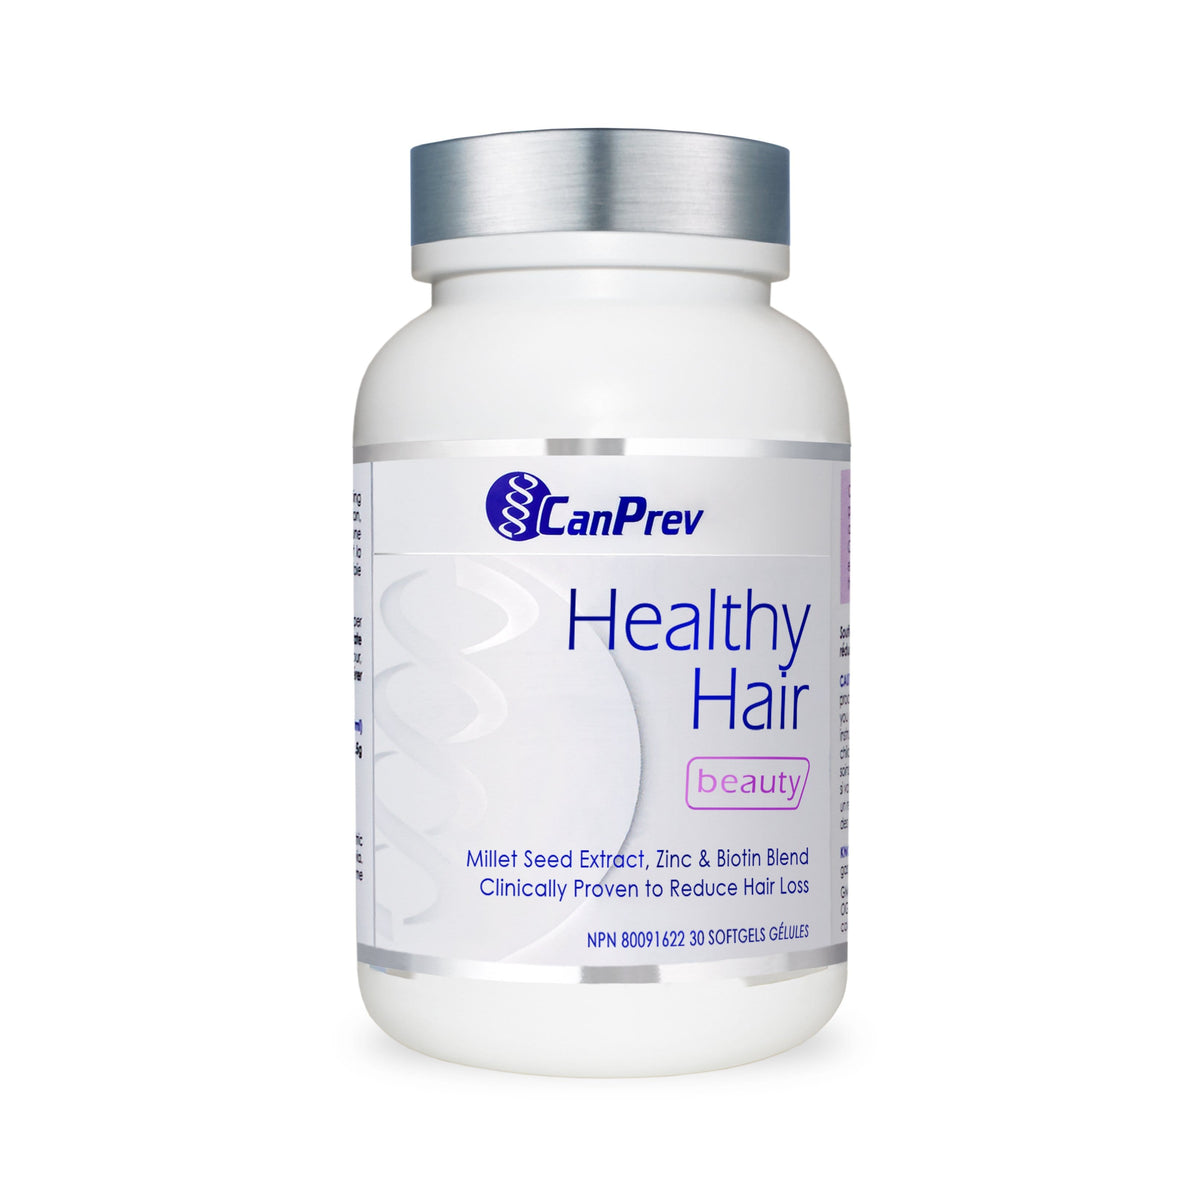 CanPrev Healthy Hair 30 Softgels - by CanPrev |ProCare Outlet|